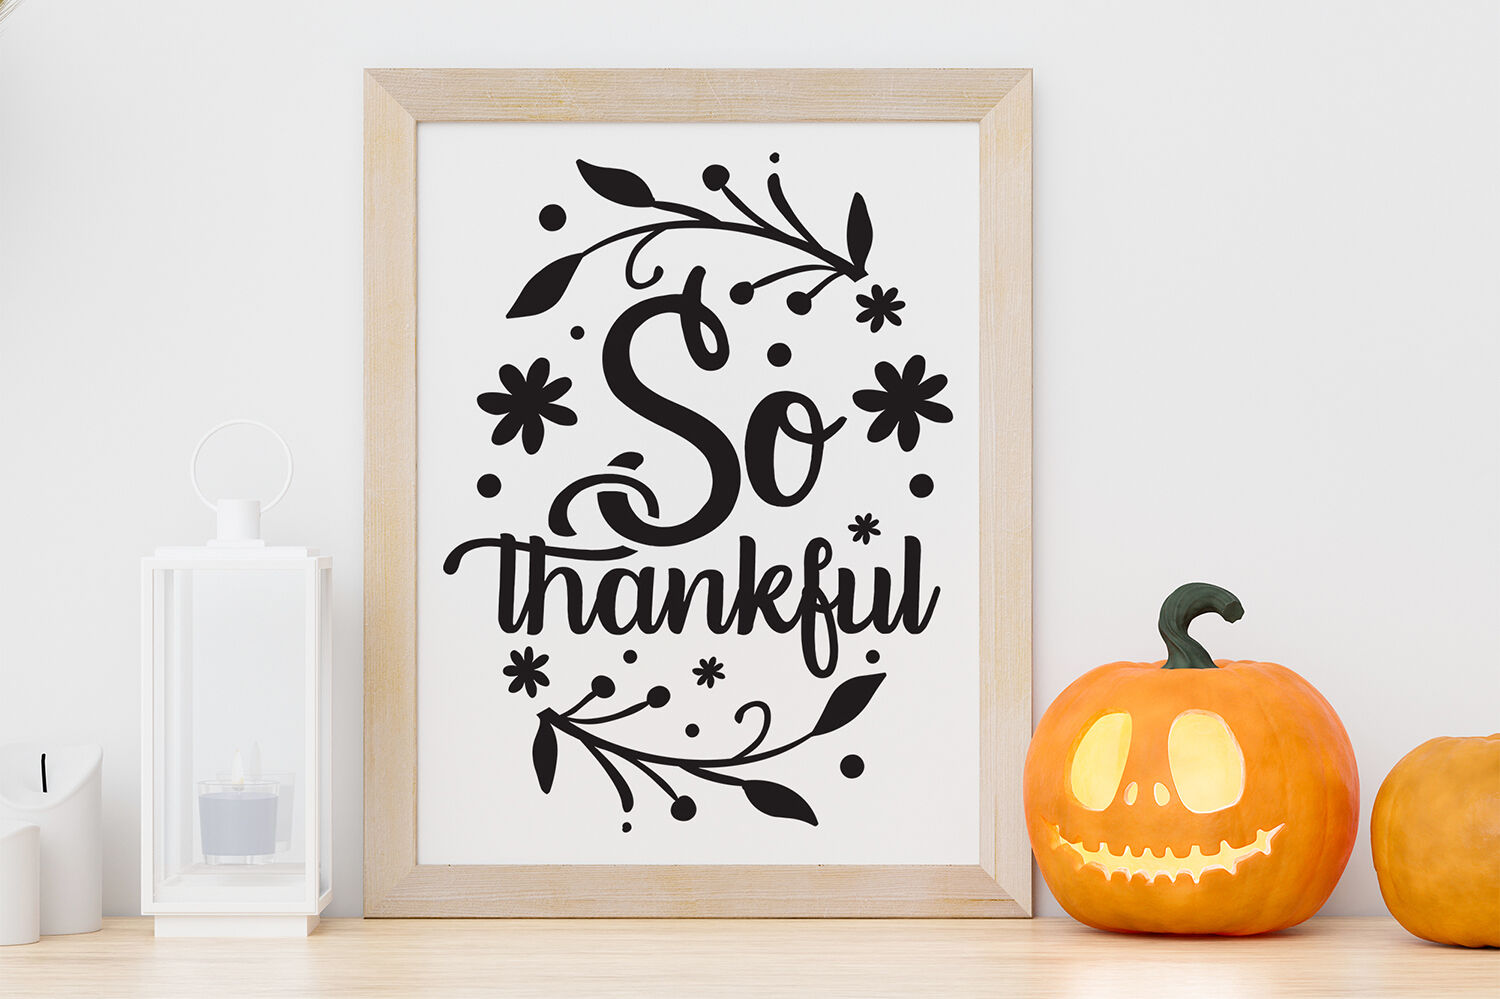 So Thankful Thanksgiving Svg Dxf Eps Png Pdf By Craftlabsvg Thehungryjpeg Com